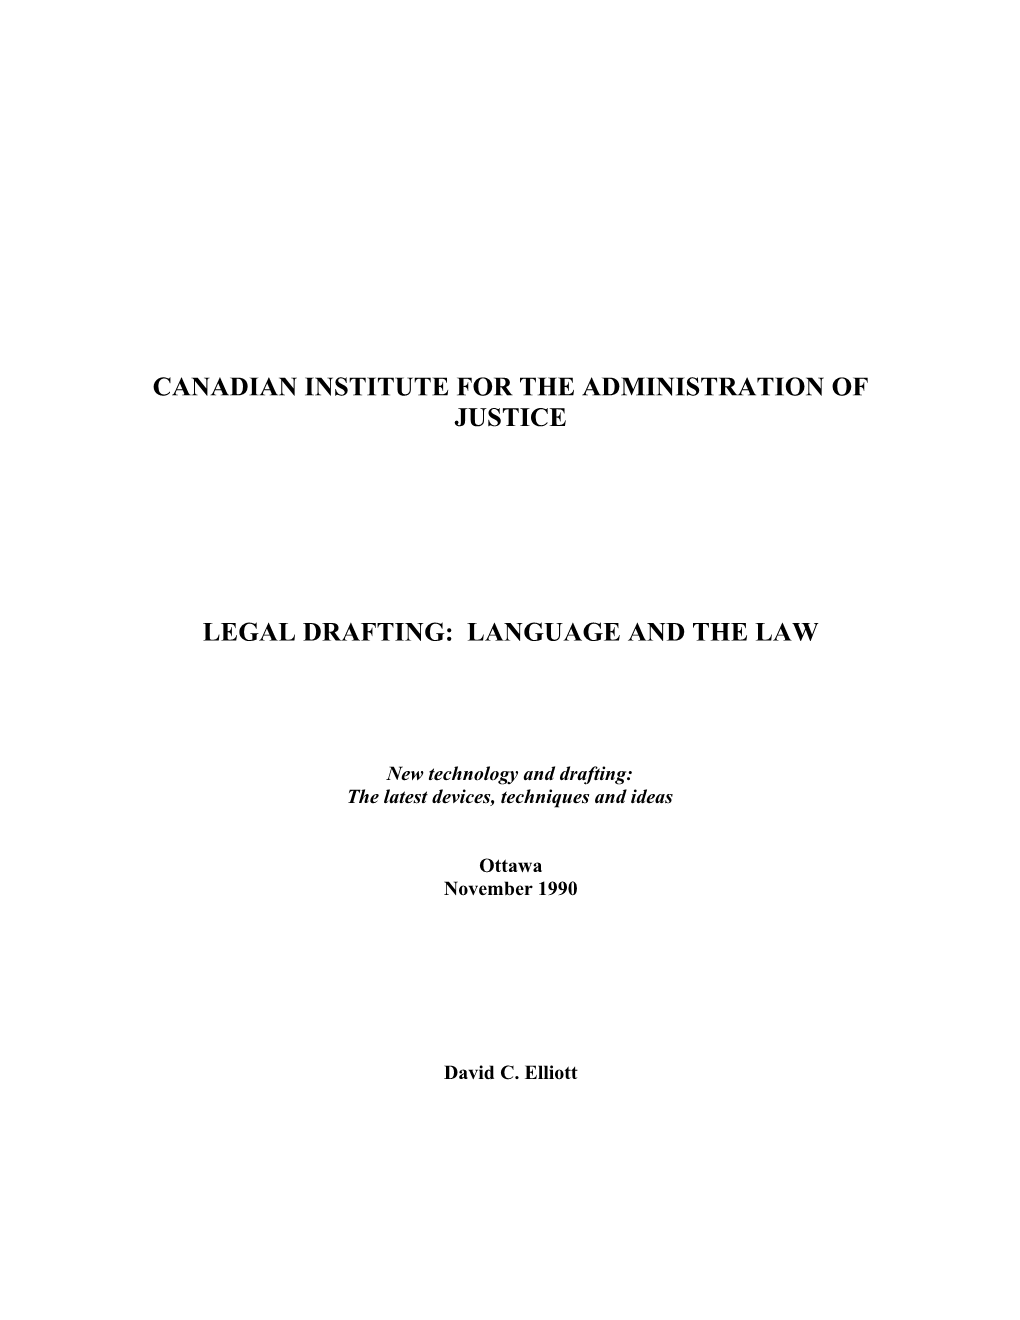 Canadian Institute for the Administration of Justice